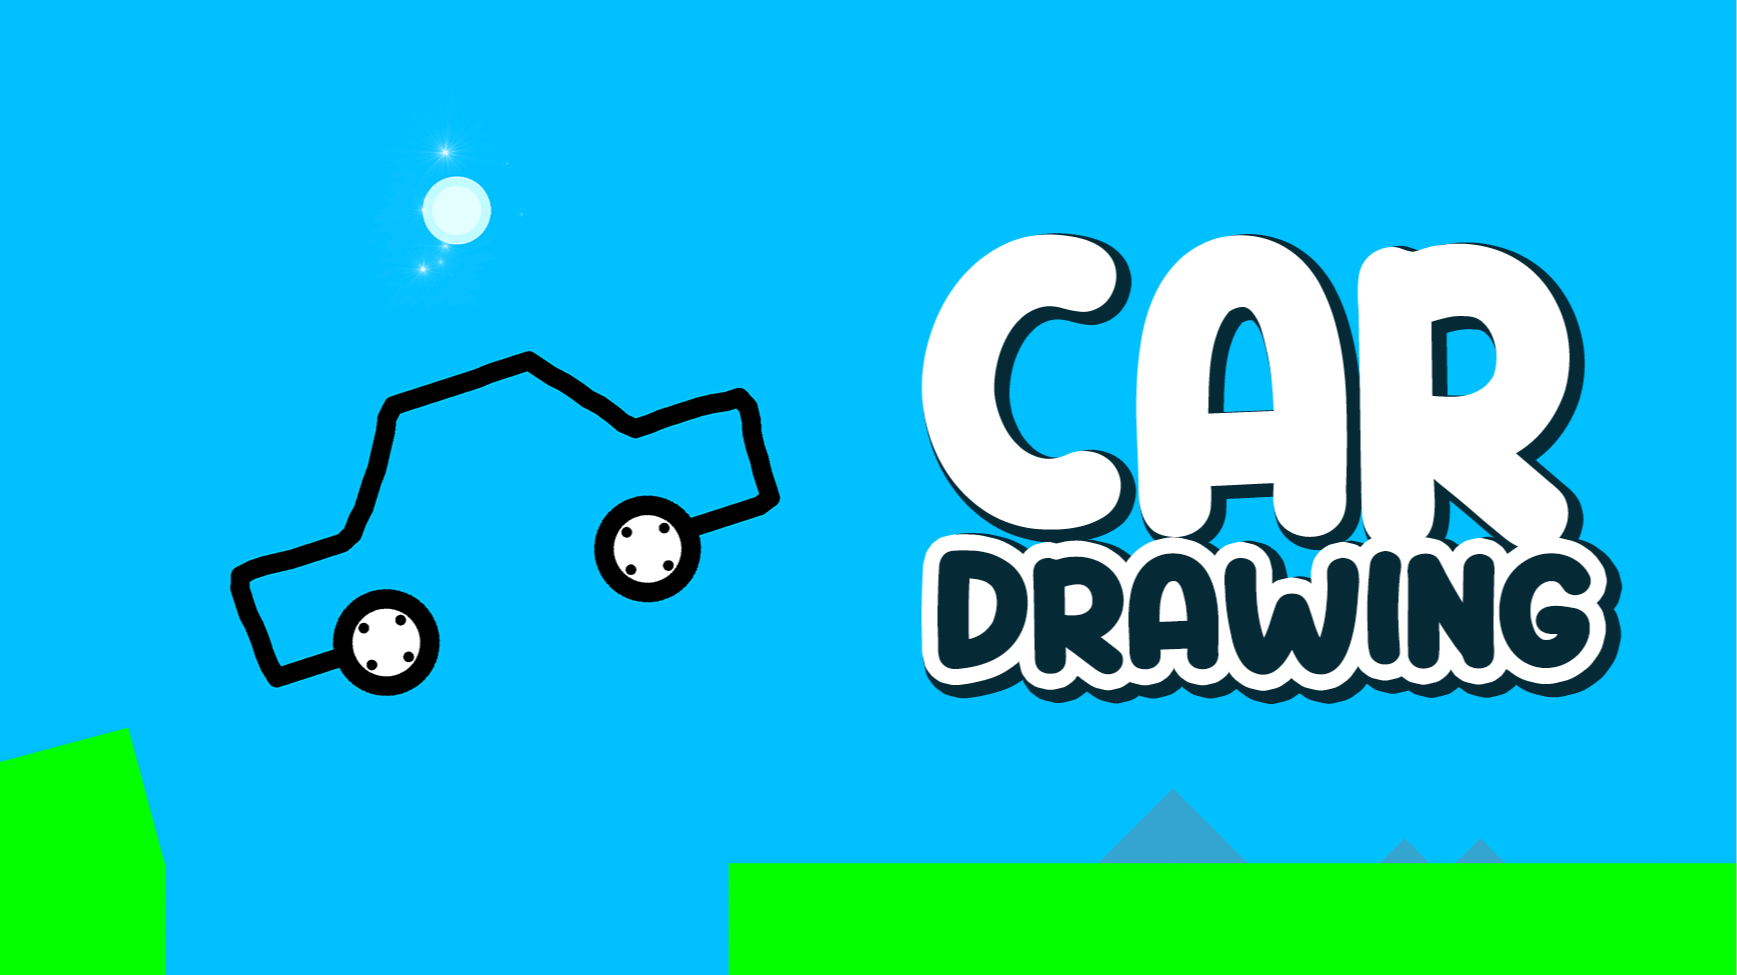 Unblocked Games - Car Drawing